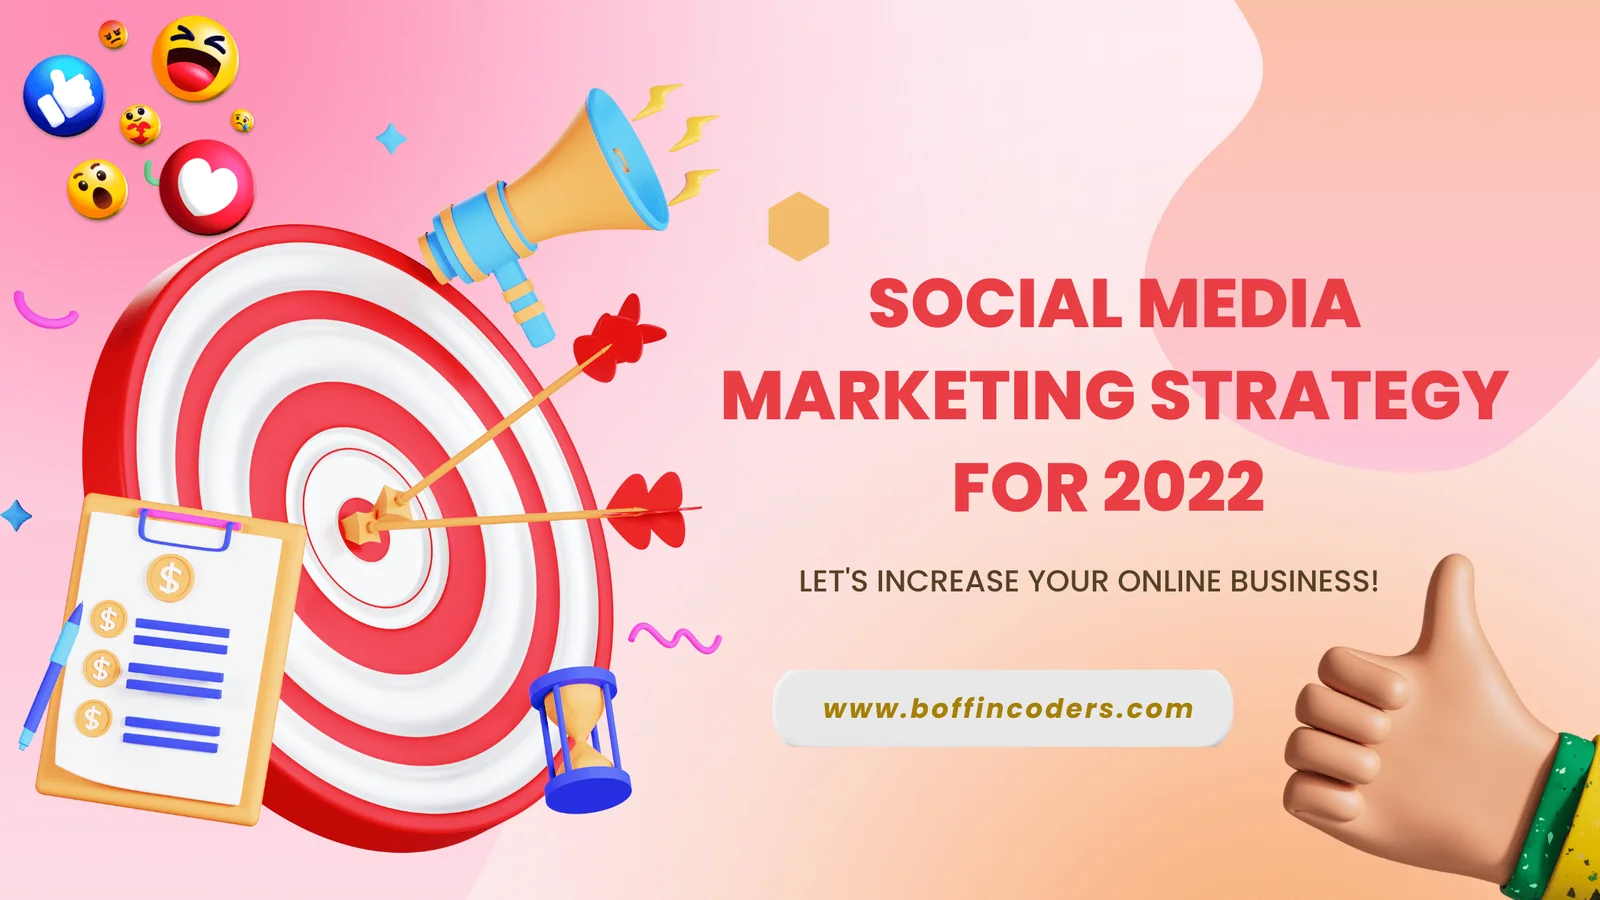 Building Your Social Media Marketing Strategy For 2022